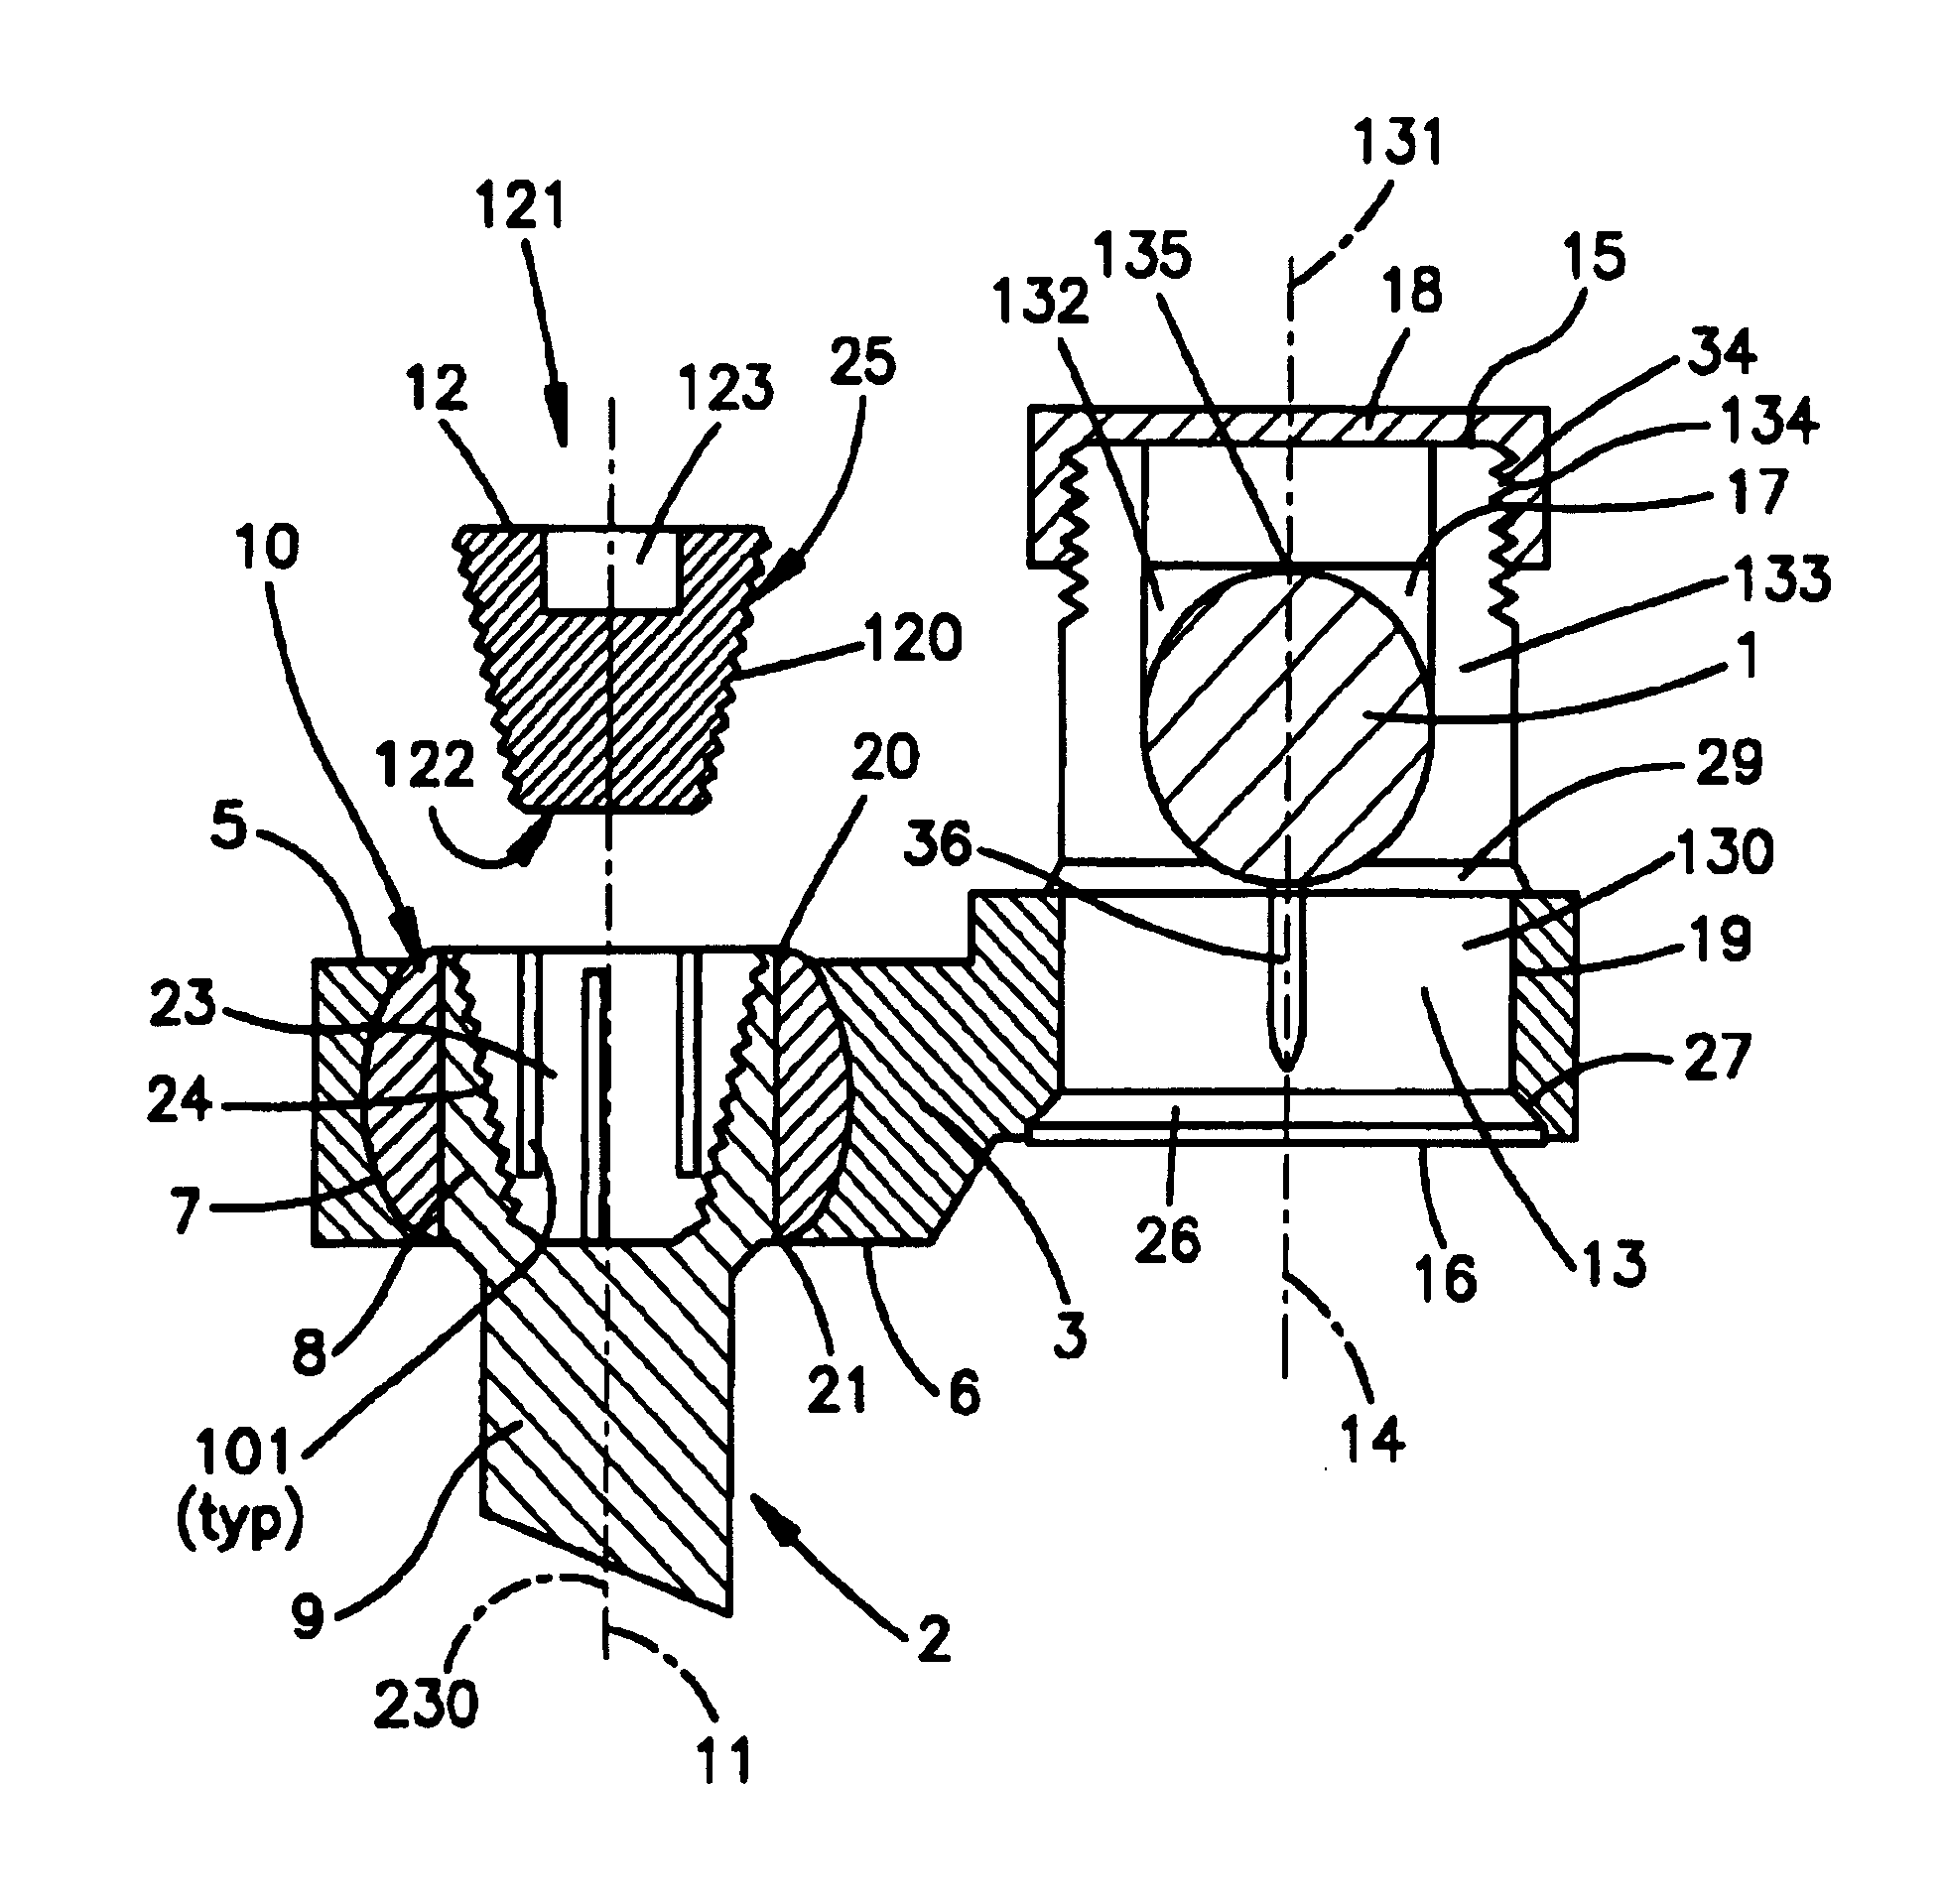 Apparatus for connecting a bone fastener to a longitudinal rod